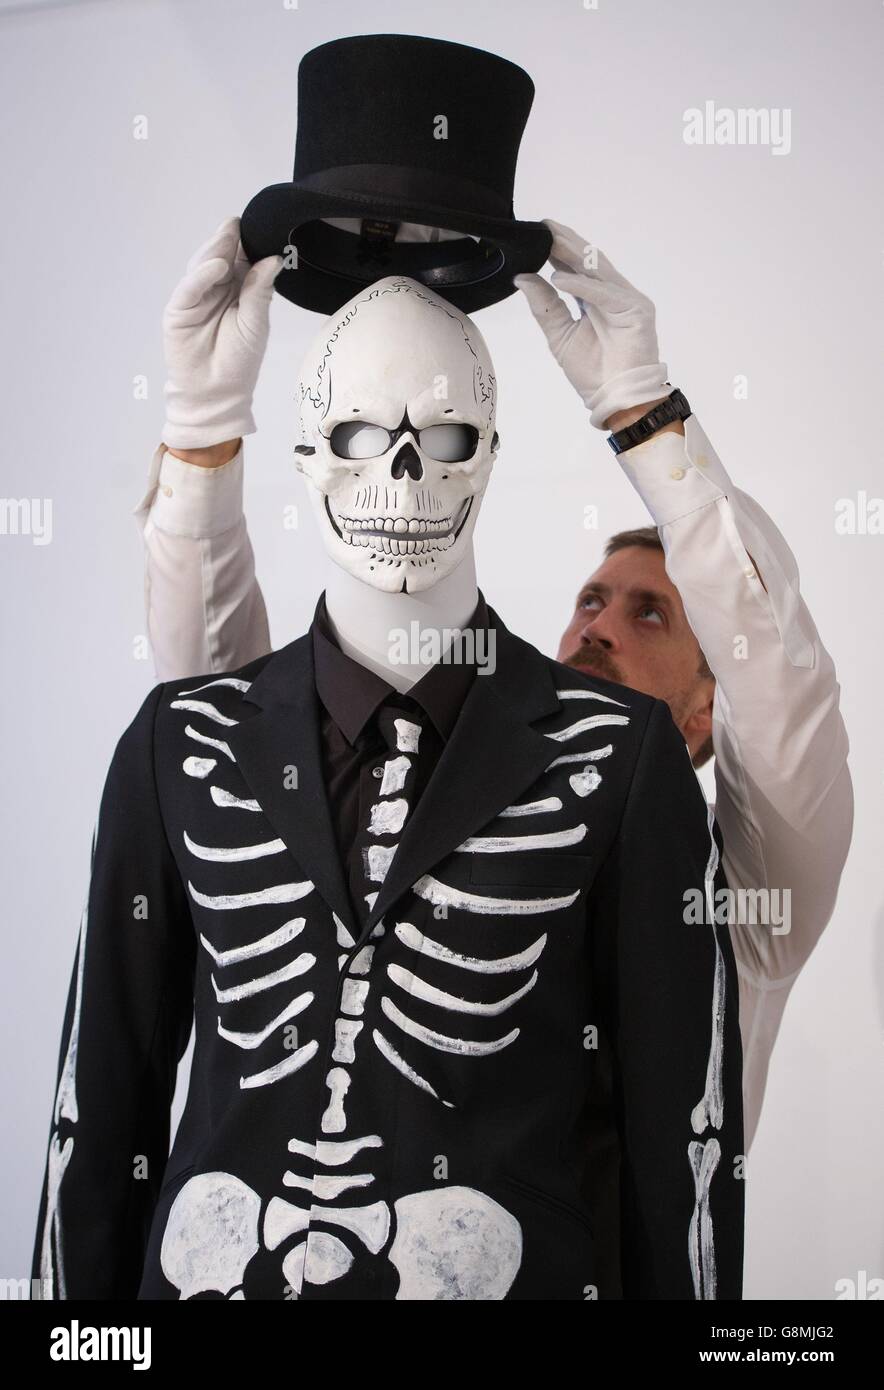 A Christies employee adjusts the hat of the Day of the Dead costume worn by Daniel  Craig in the James Bond film 'Spectre', valued at &Acirc;£12,000 -  "&Acirc;£18,000, at Christie's in London,